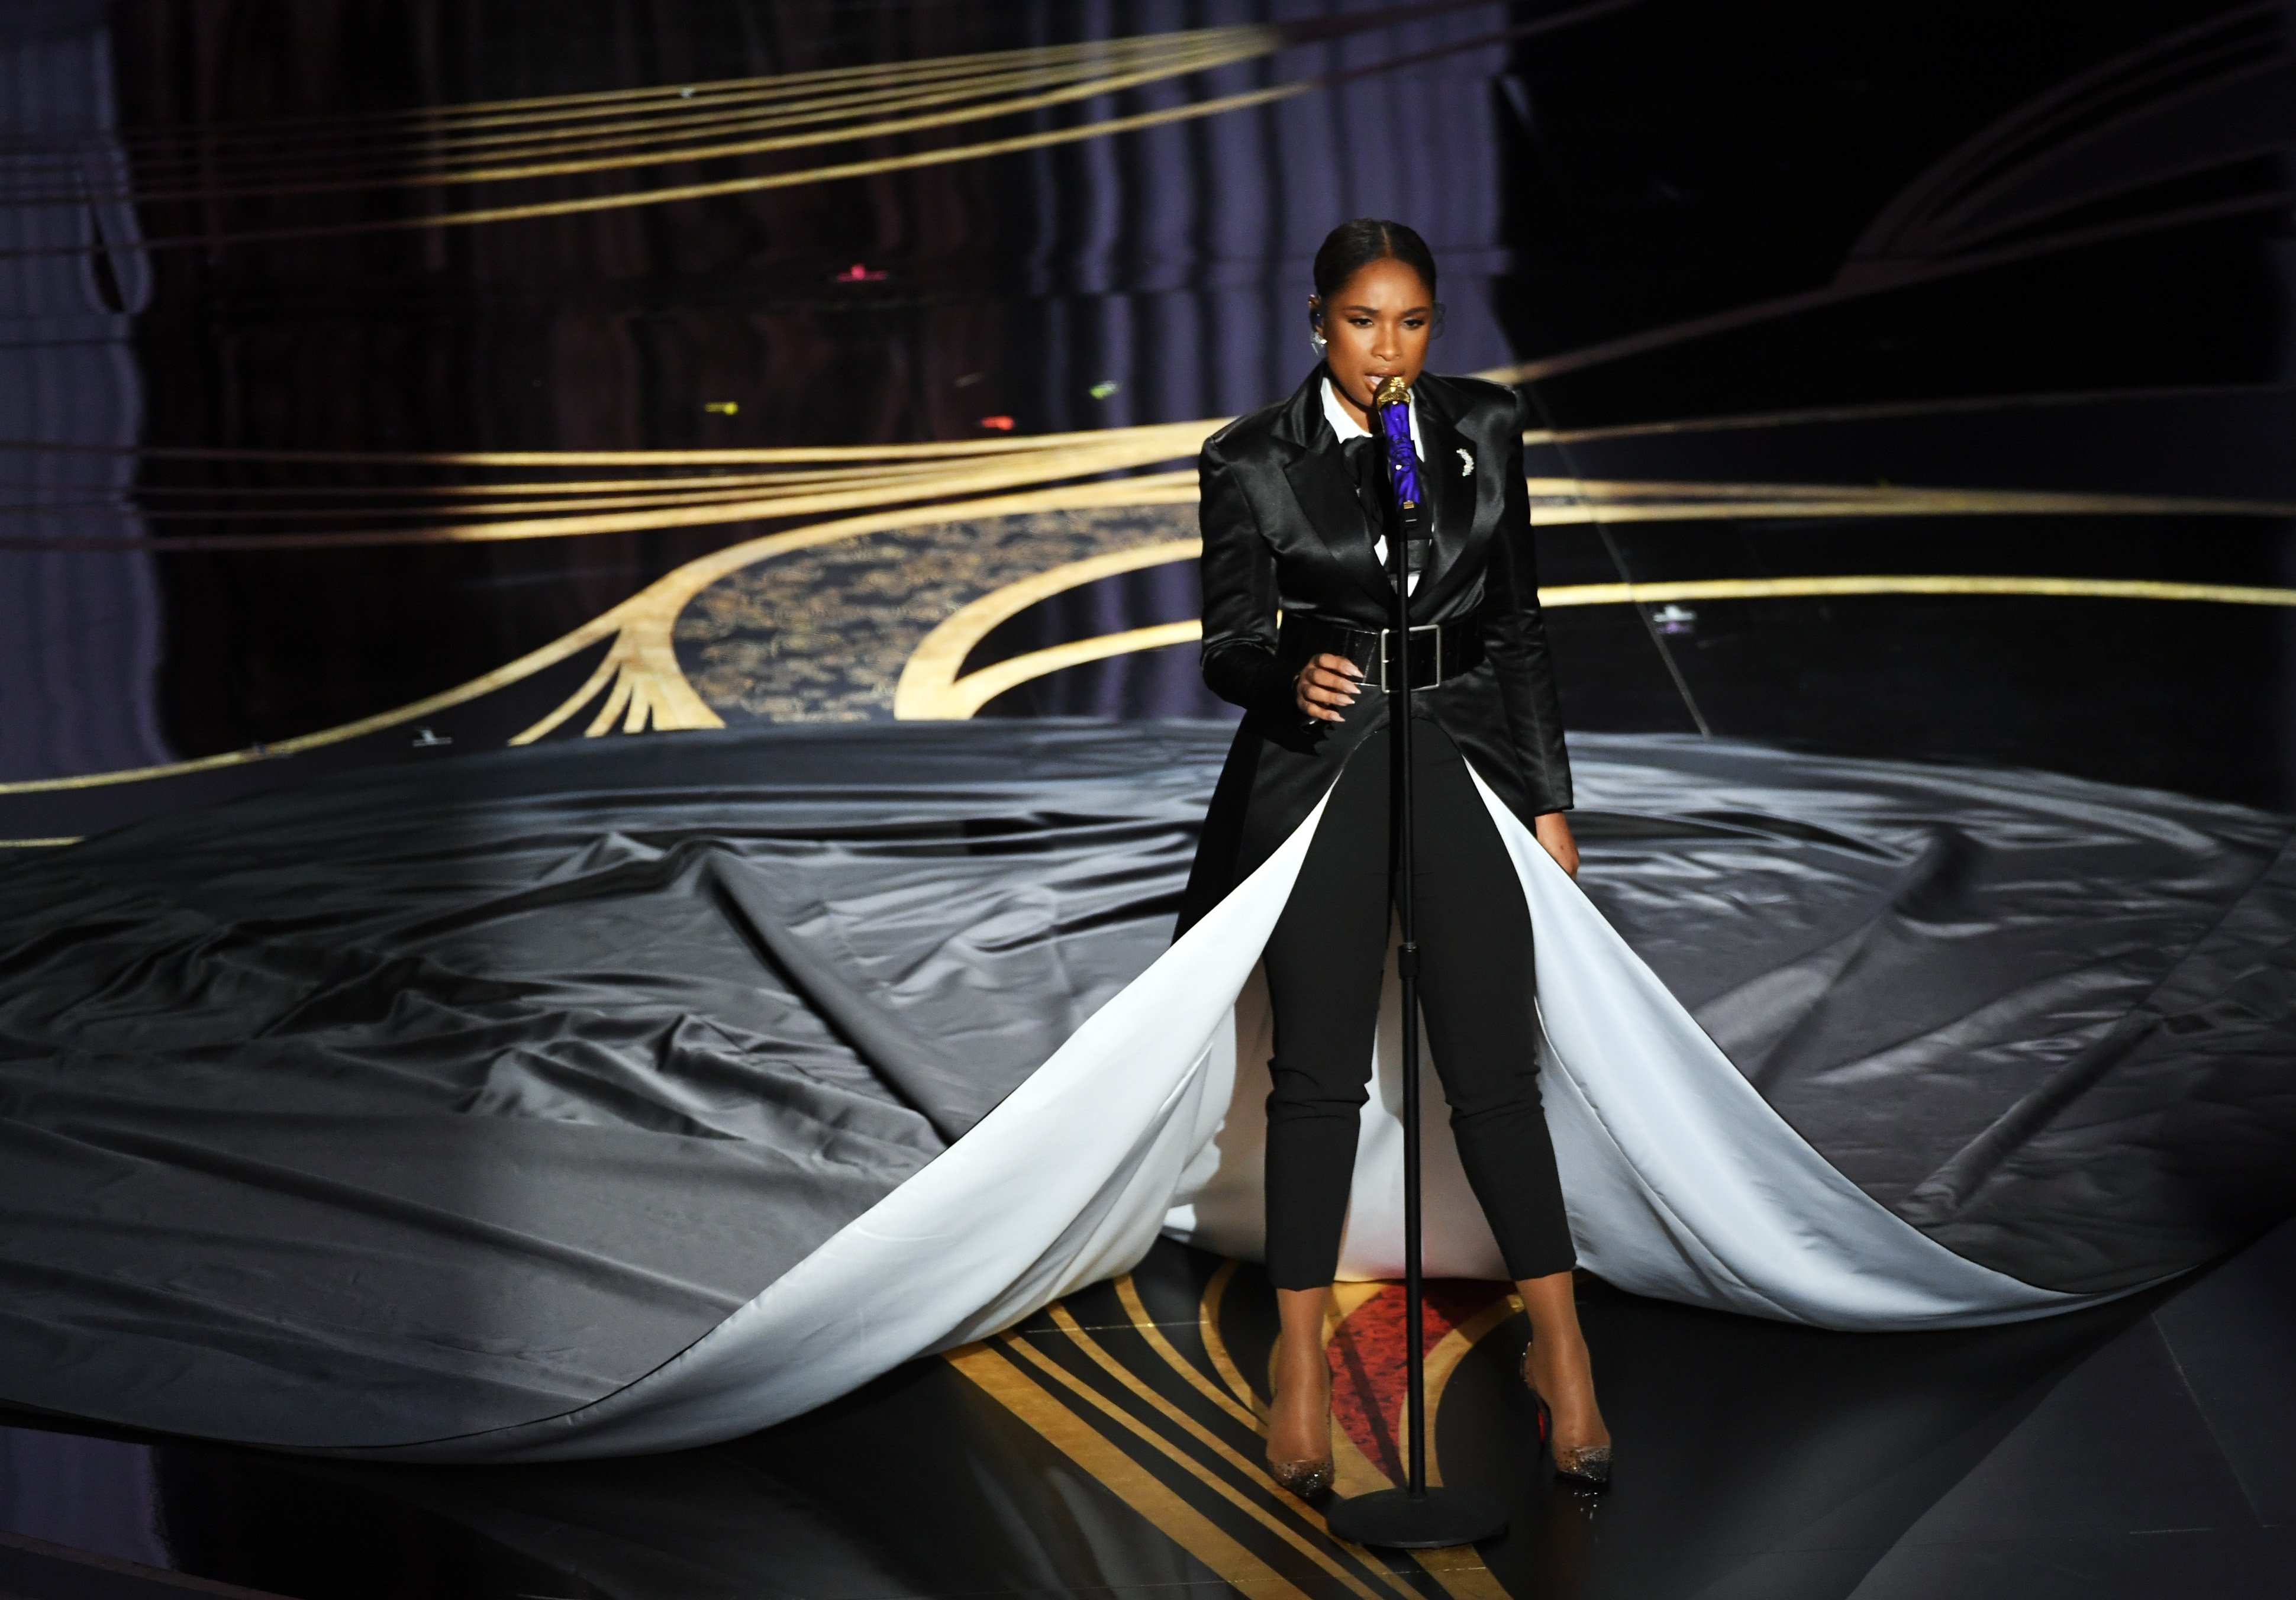 Jennifer Hudson performs onstage at the 91st Annual Academy Awards on Feb. 24, 2019 in California | Photo: Getty Images